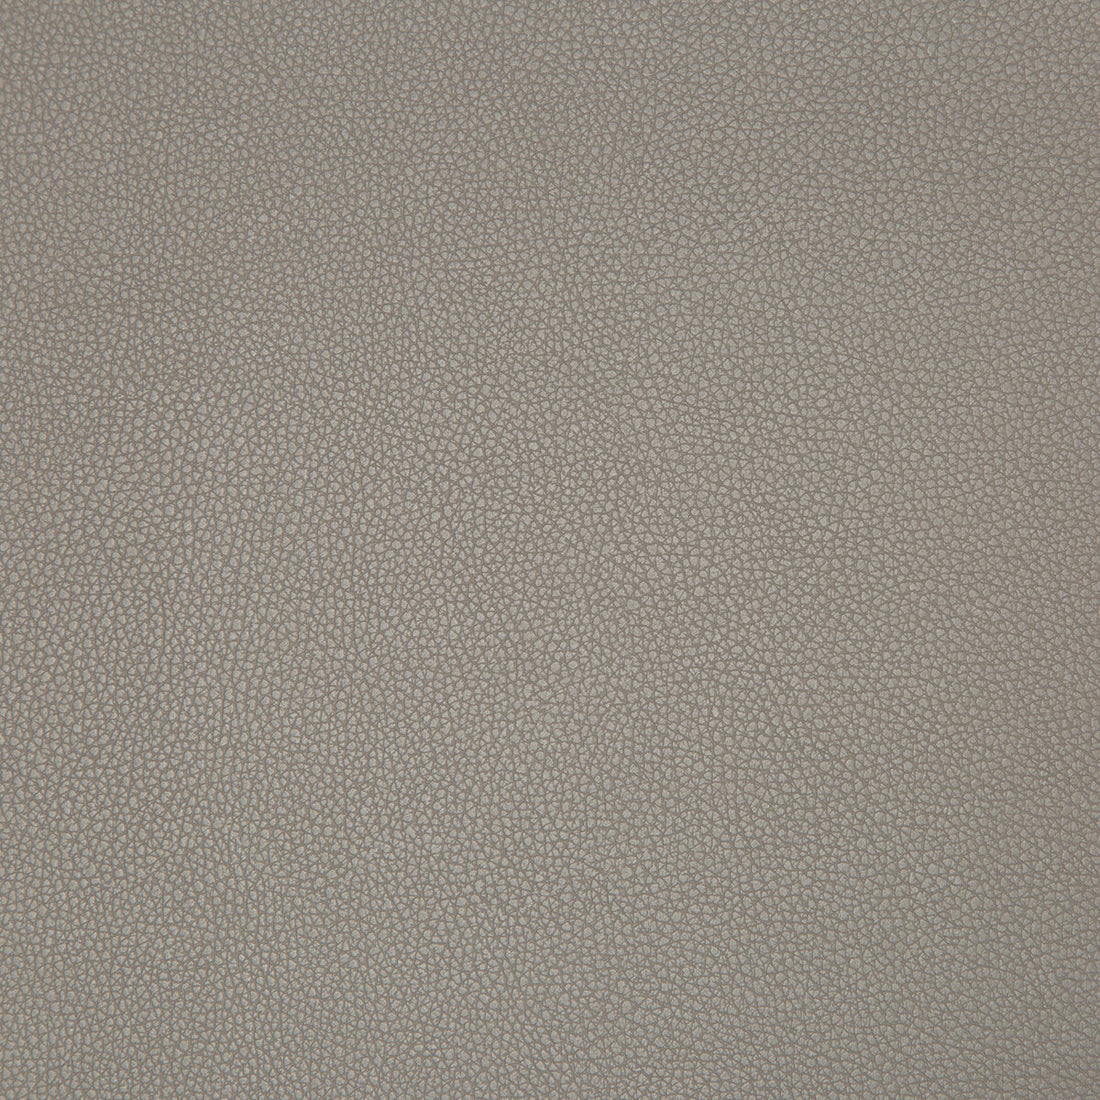 Syrus fabric in truffle color - pattern SYRUS.2106.0 - by Kravet Contract